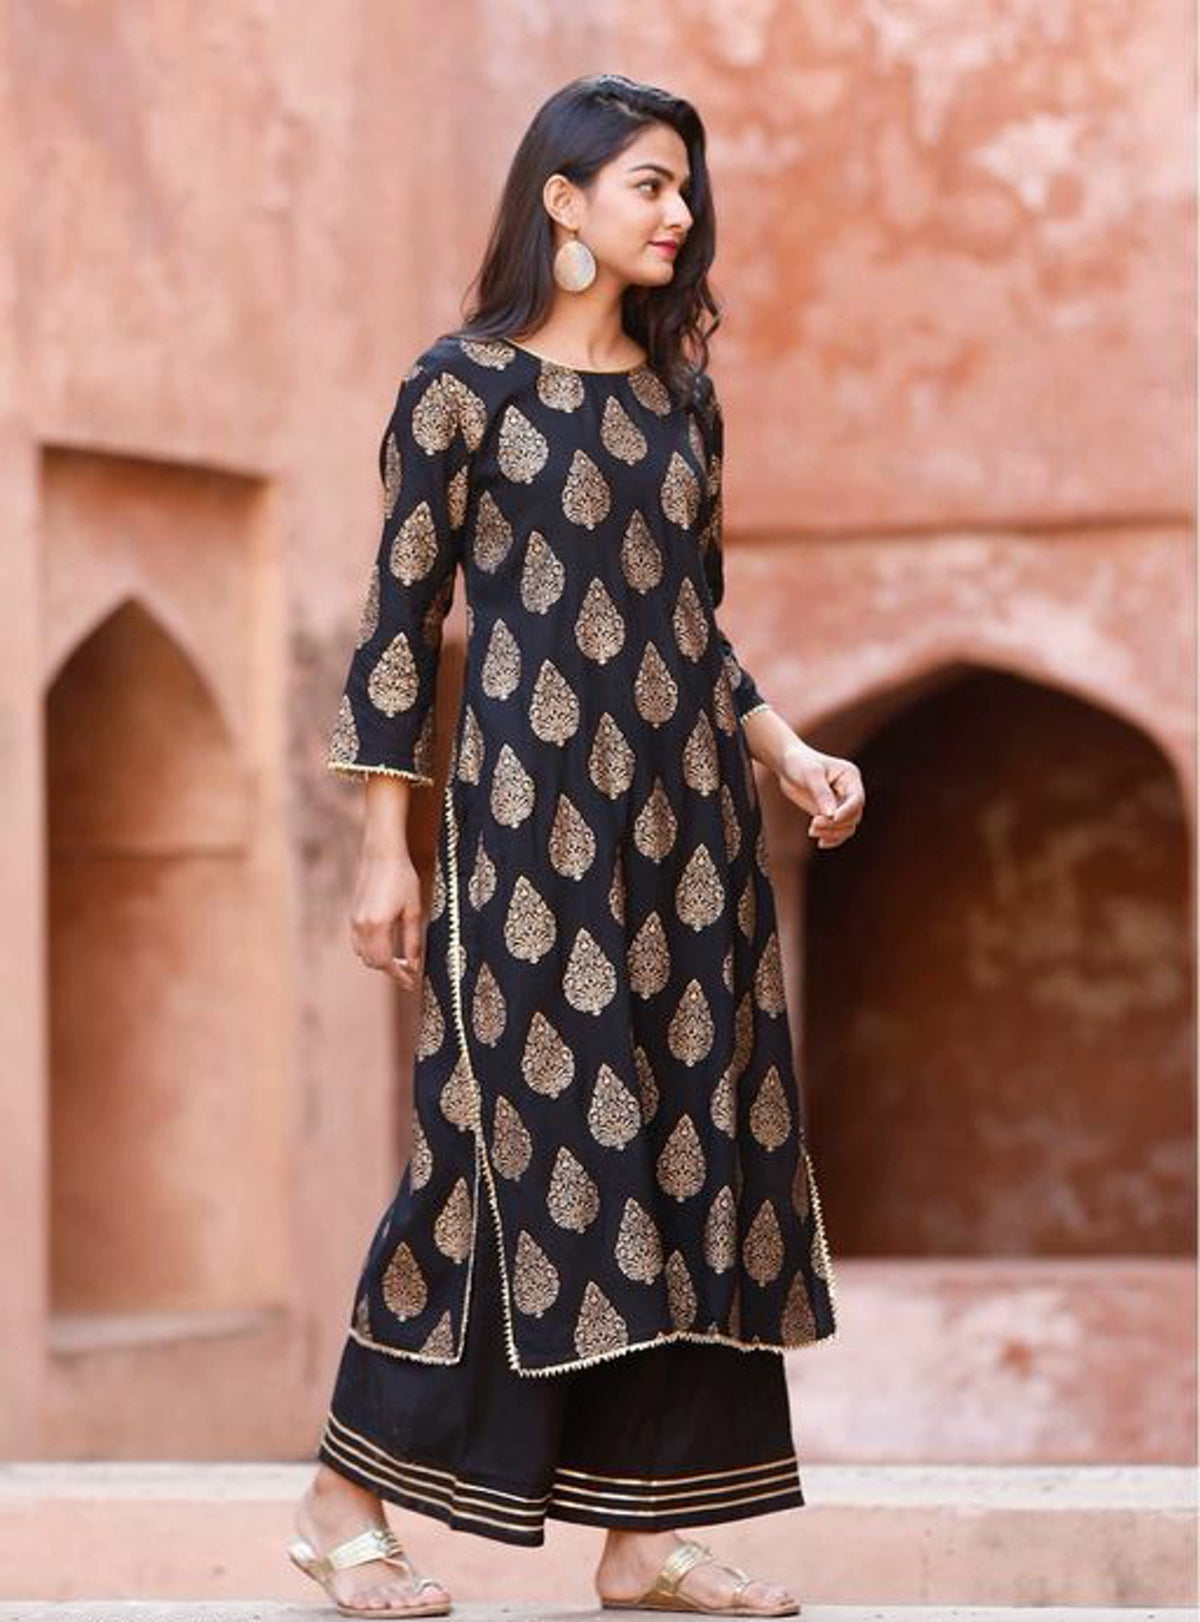 Buy MansiCollections Women's Viscose Half Sleeve Square Neck Black Kurti  Top at Amazon.in